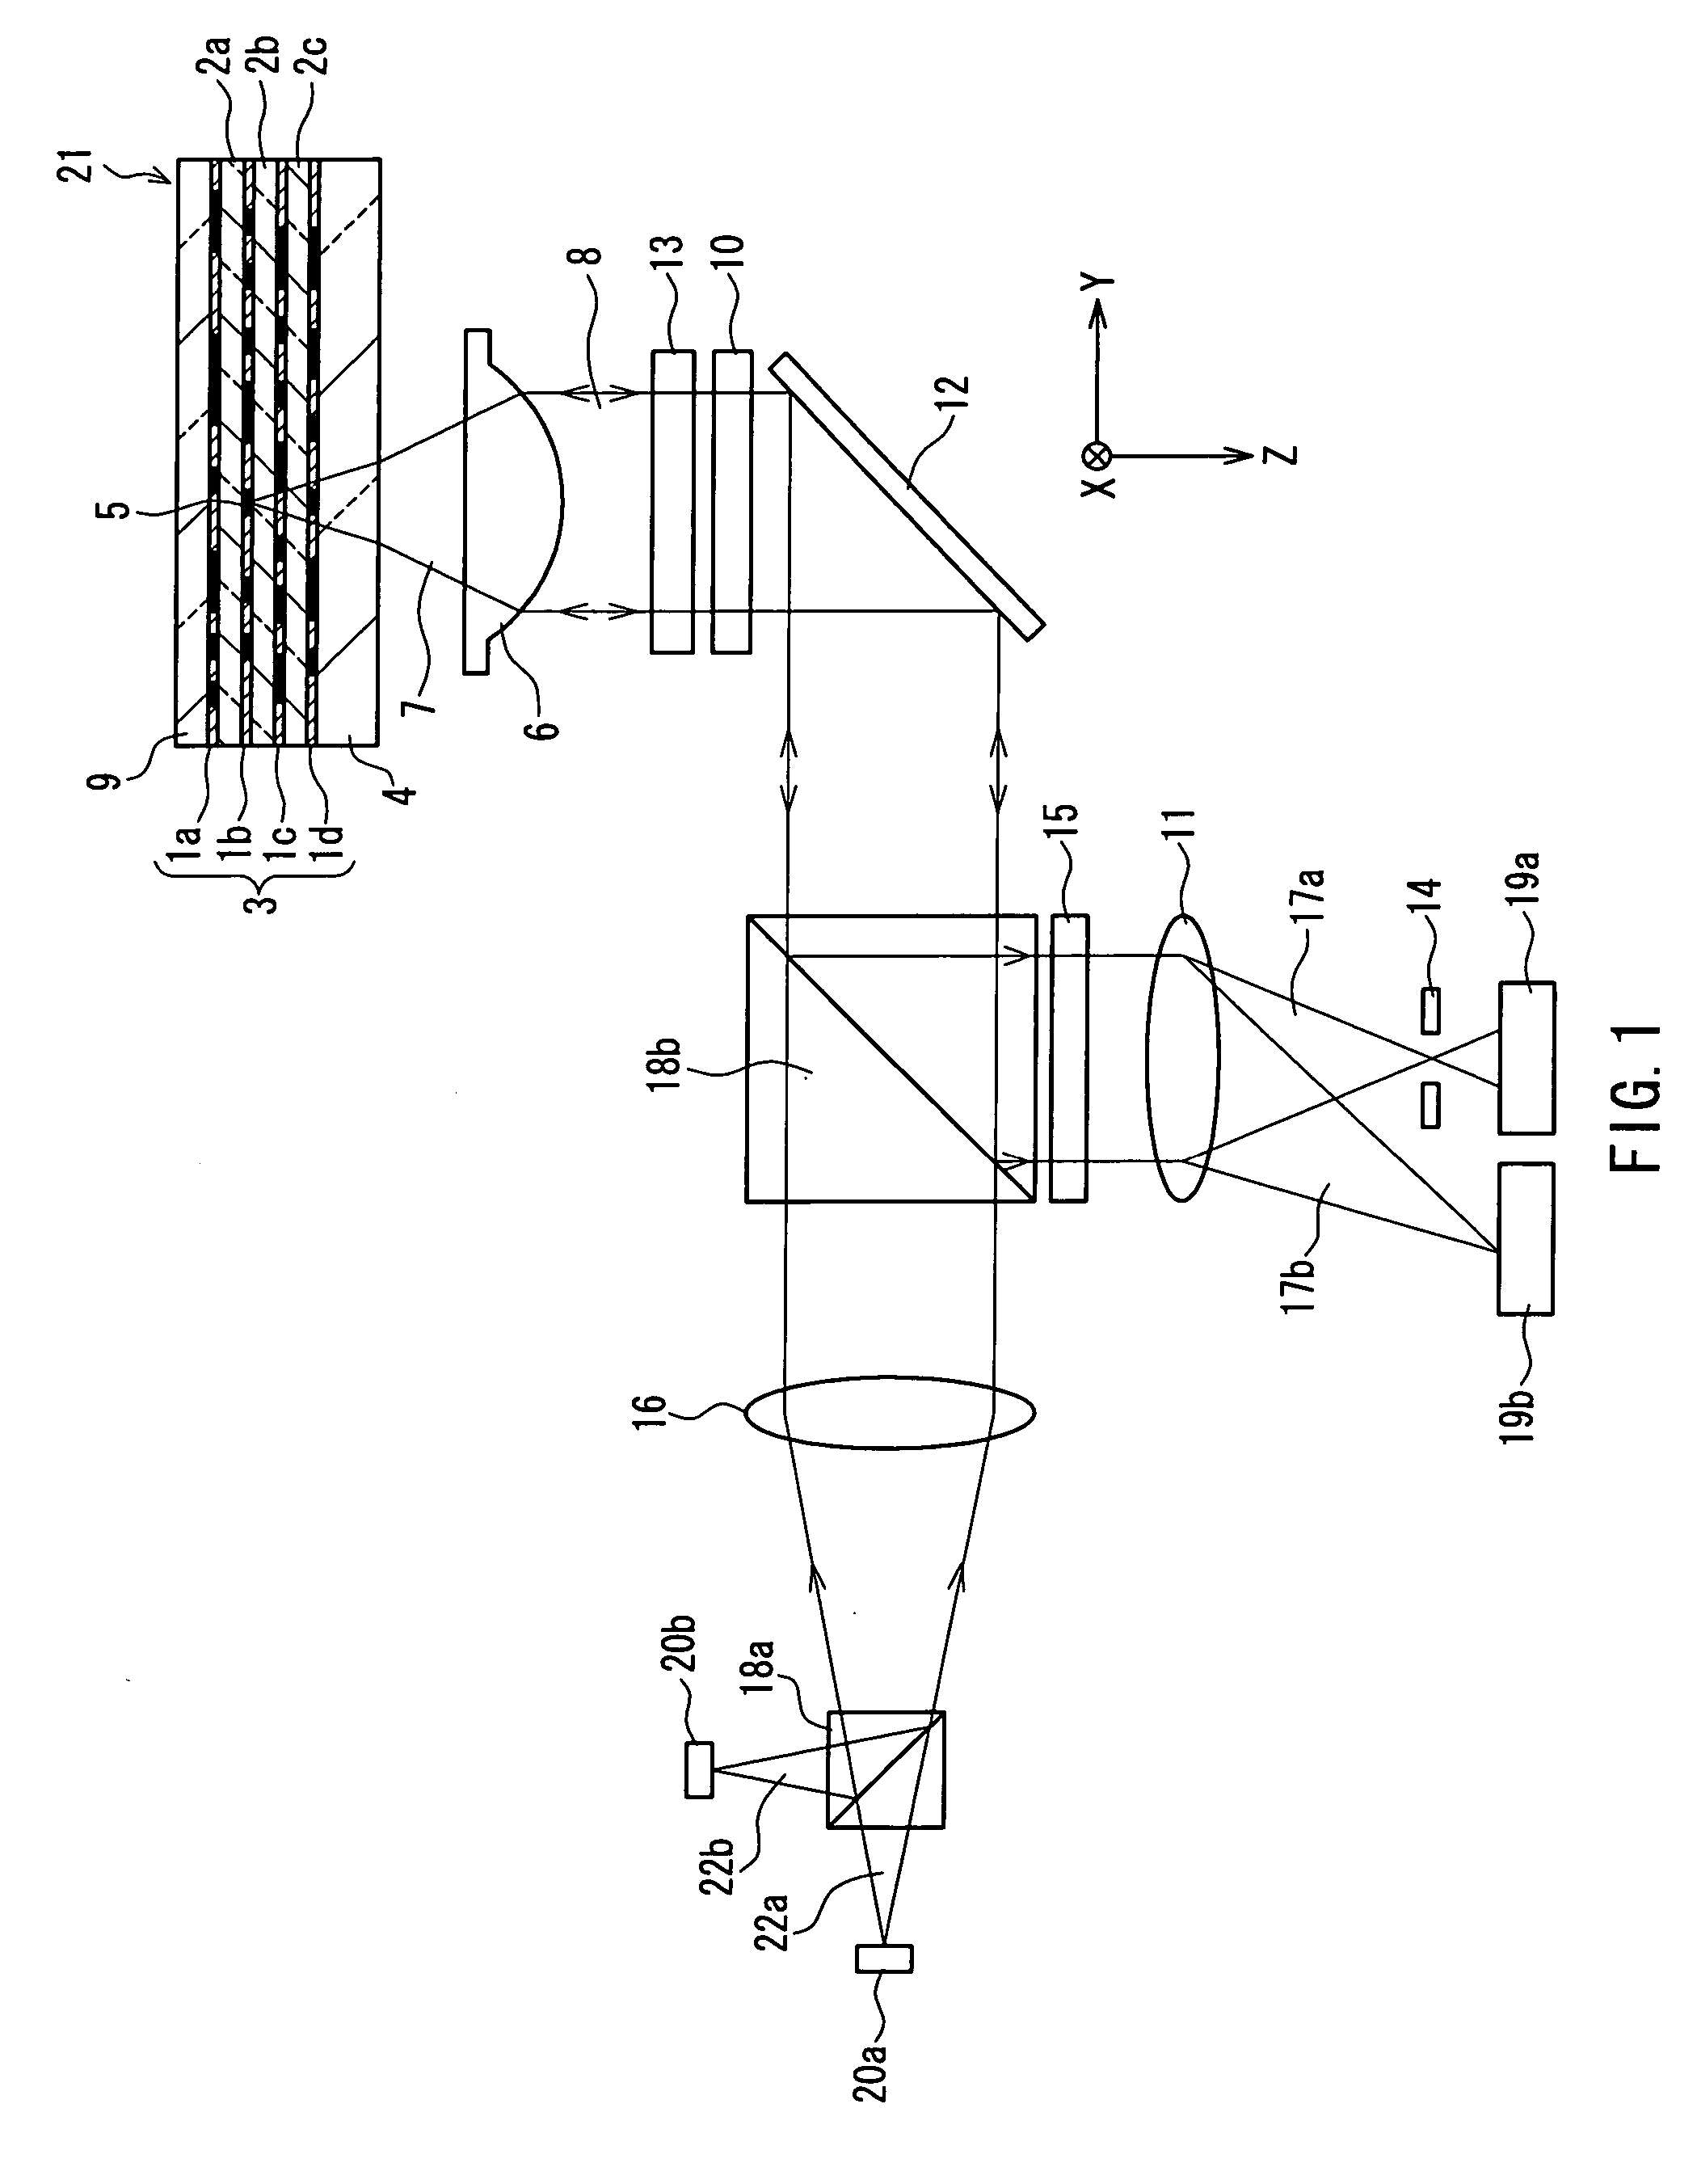 Optical information reproduction device